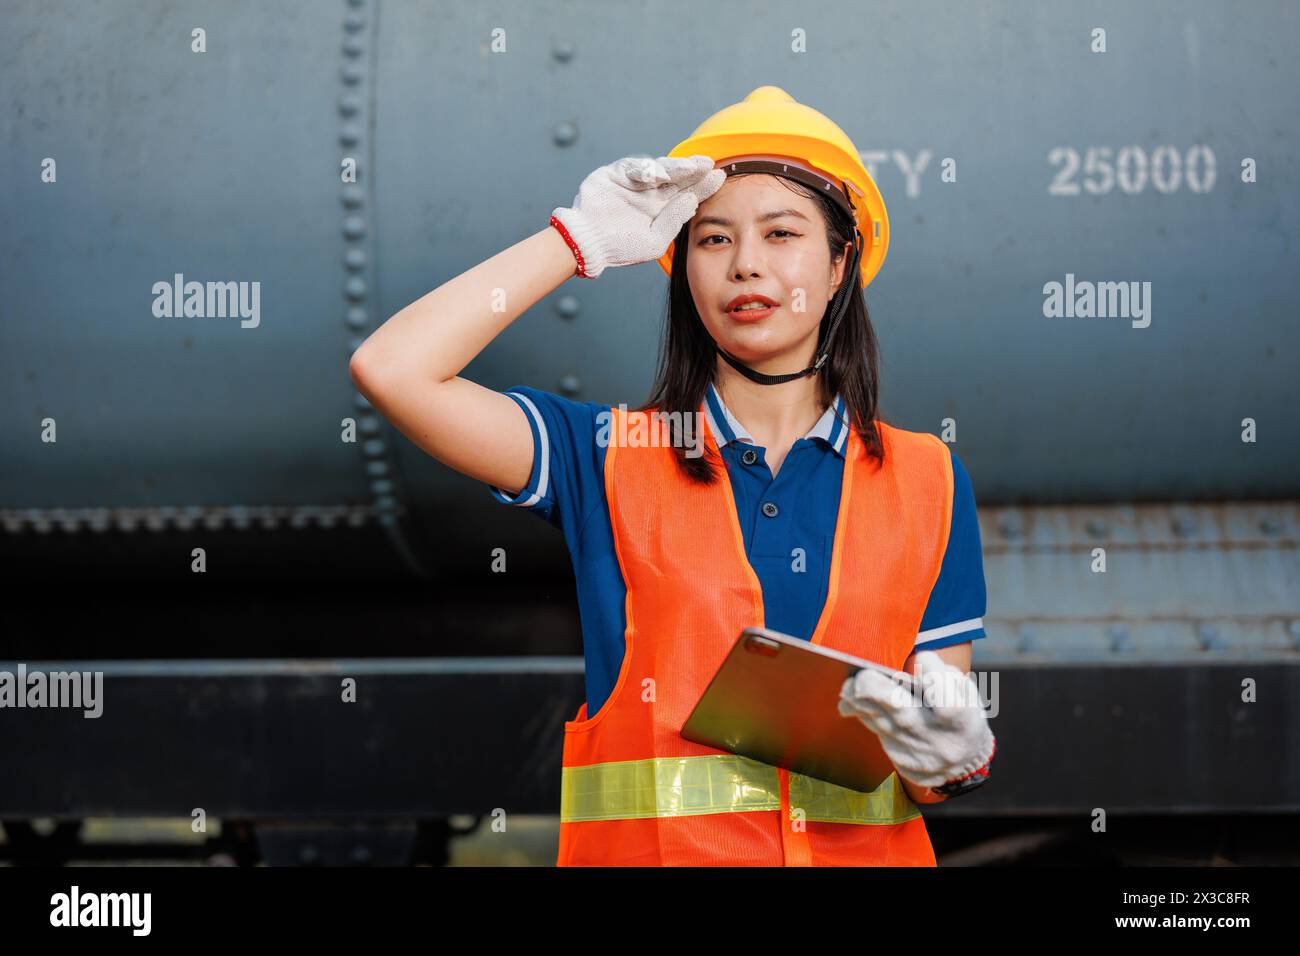 Tired exhausted women worker. engineer train service maintenance locomotive hot sweating. Stock Photo